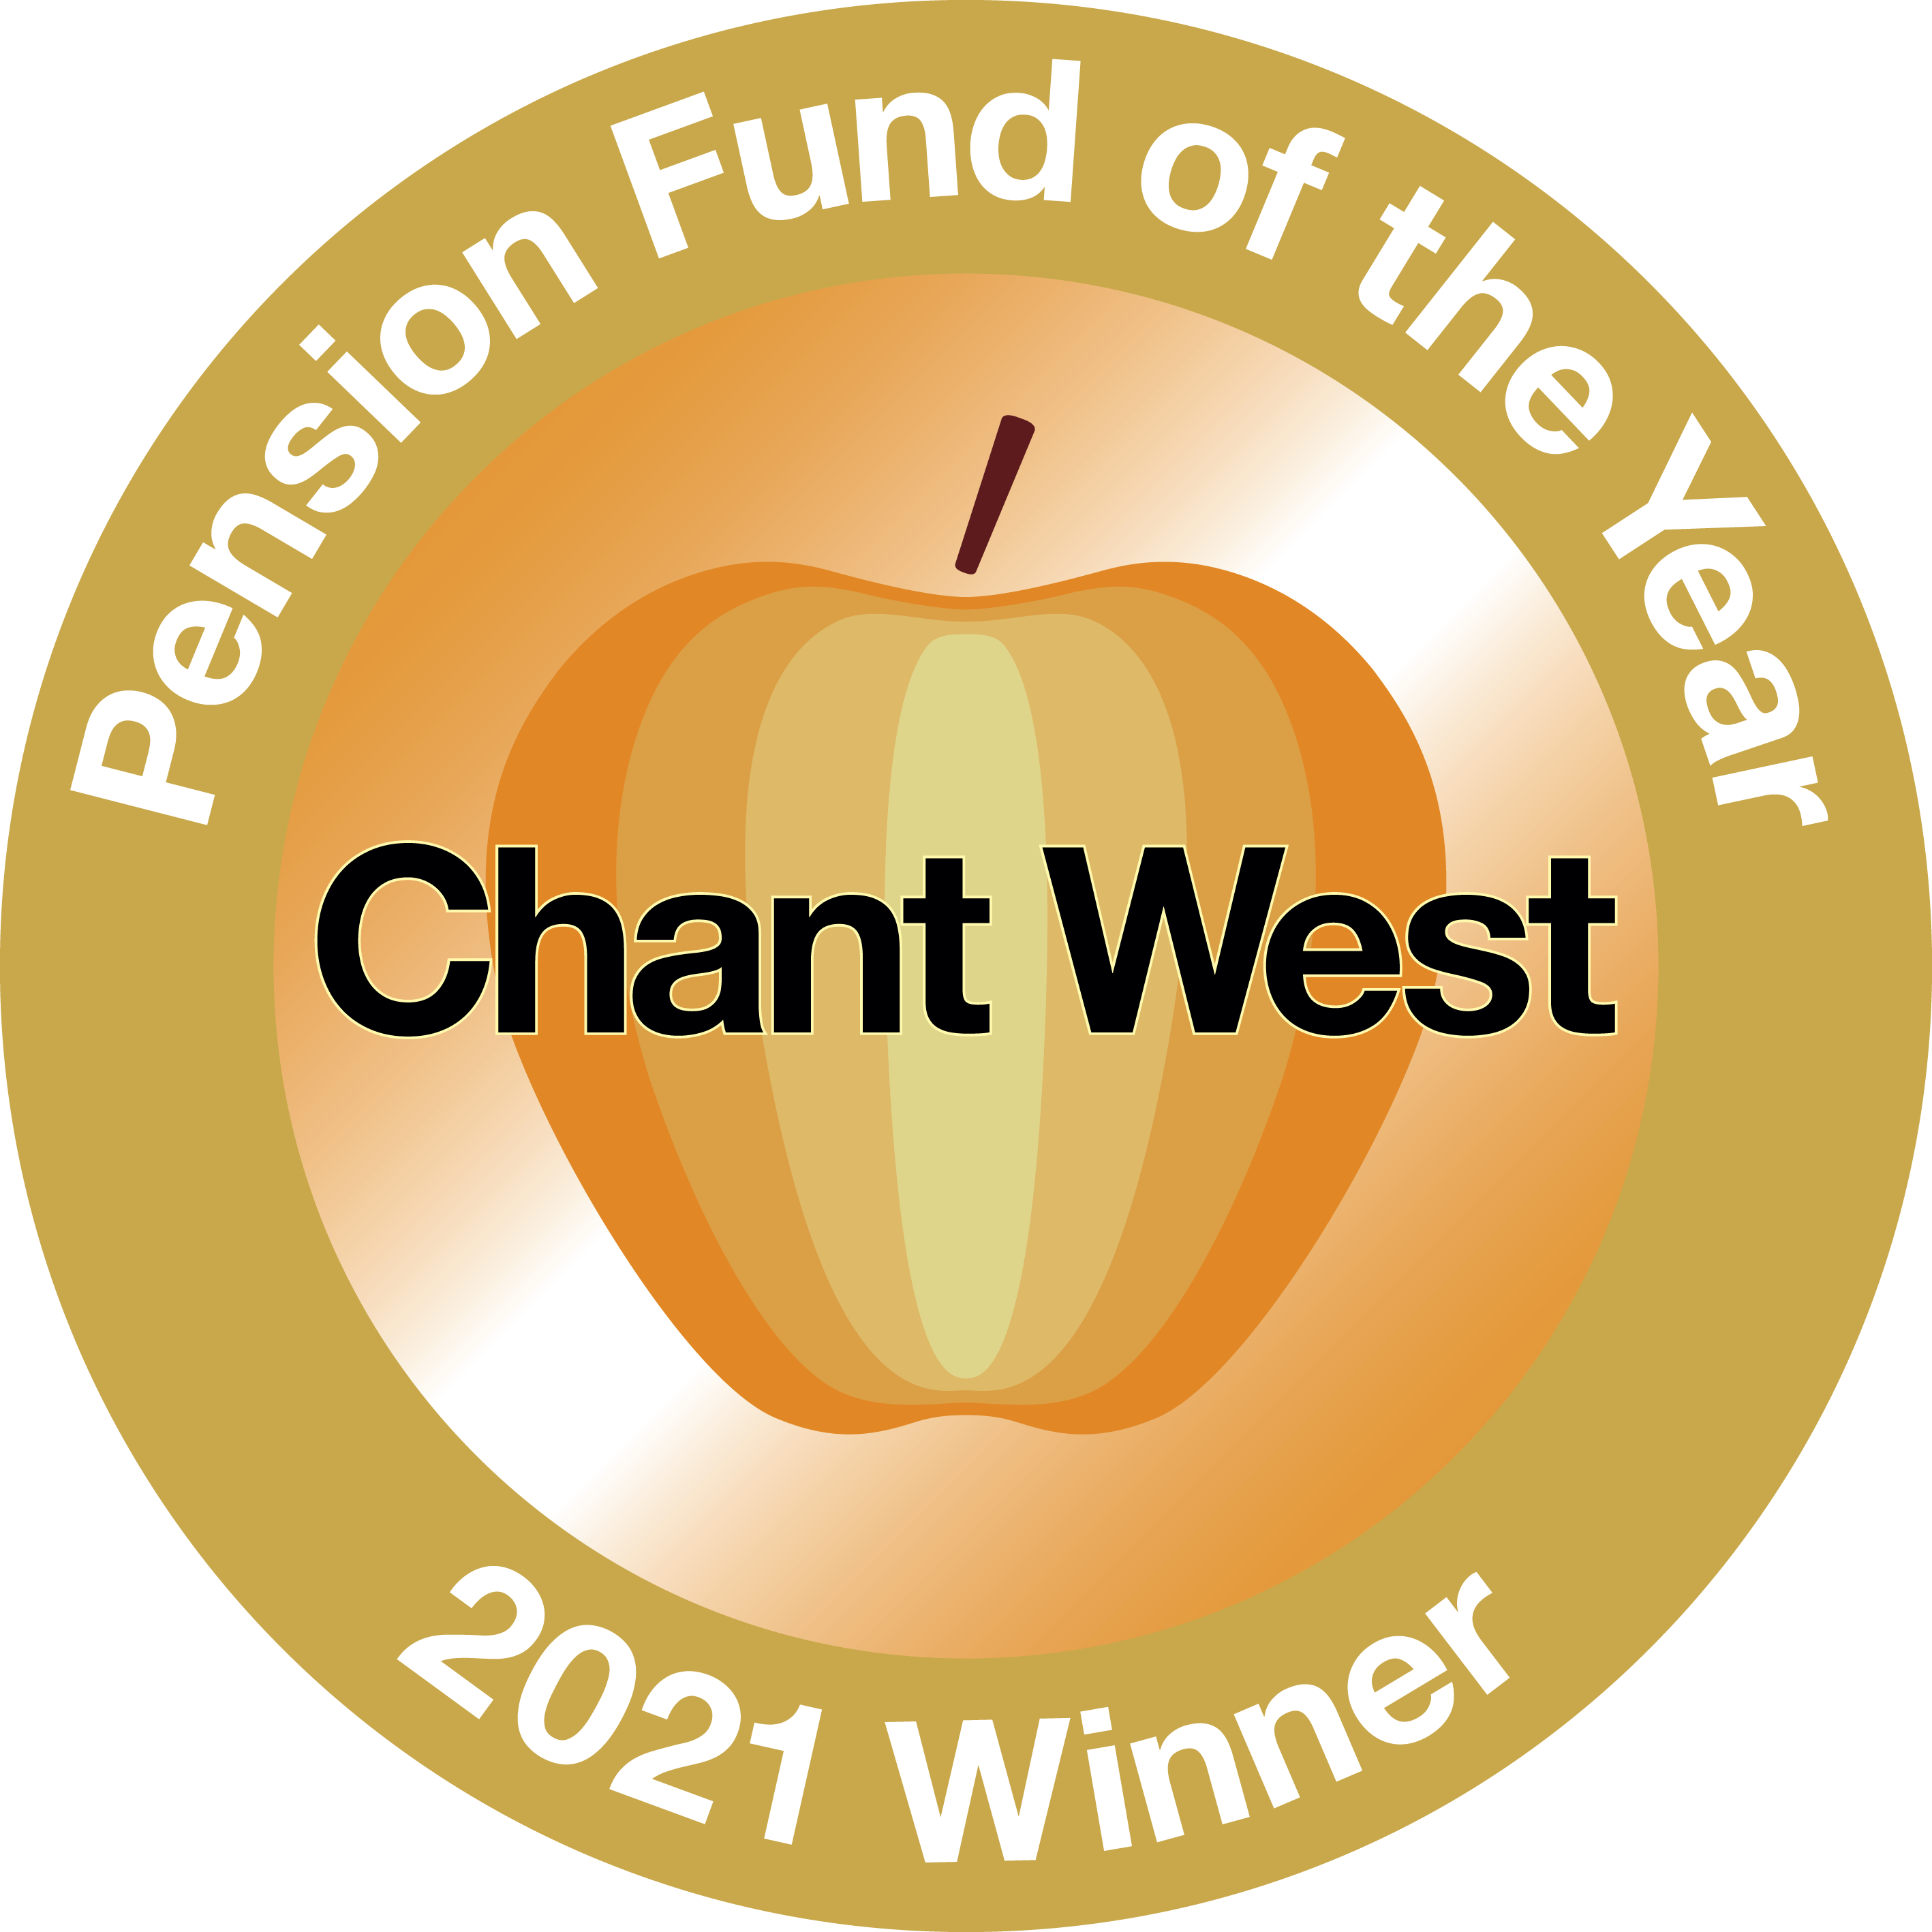 Logo of Chant West Pension Fund of the Year 2021 Winner